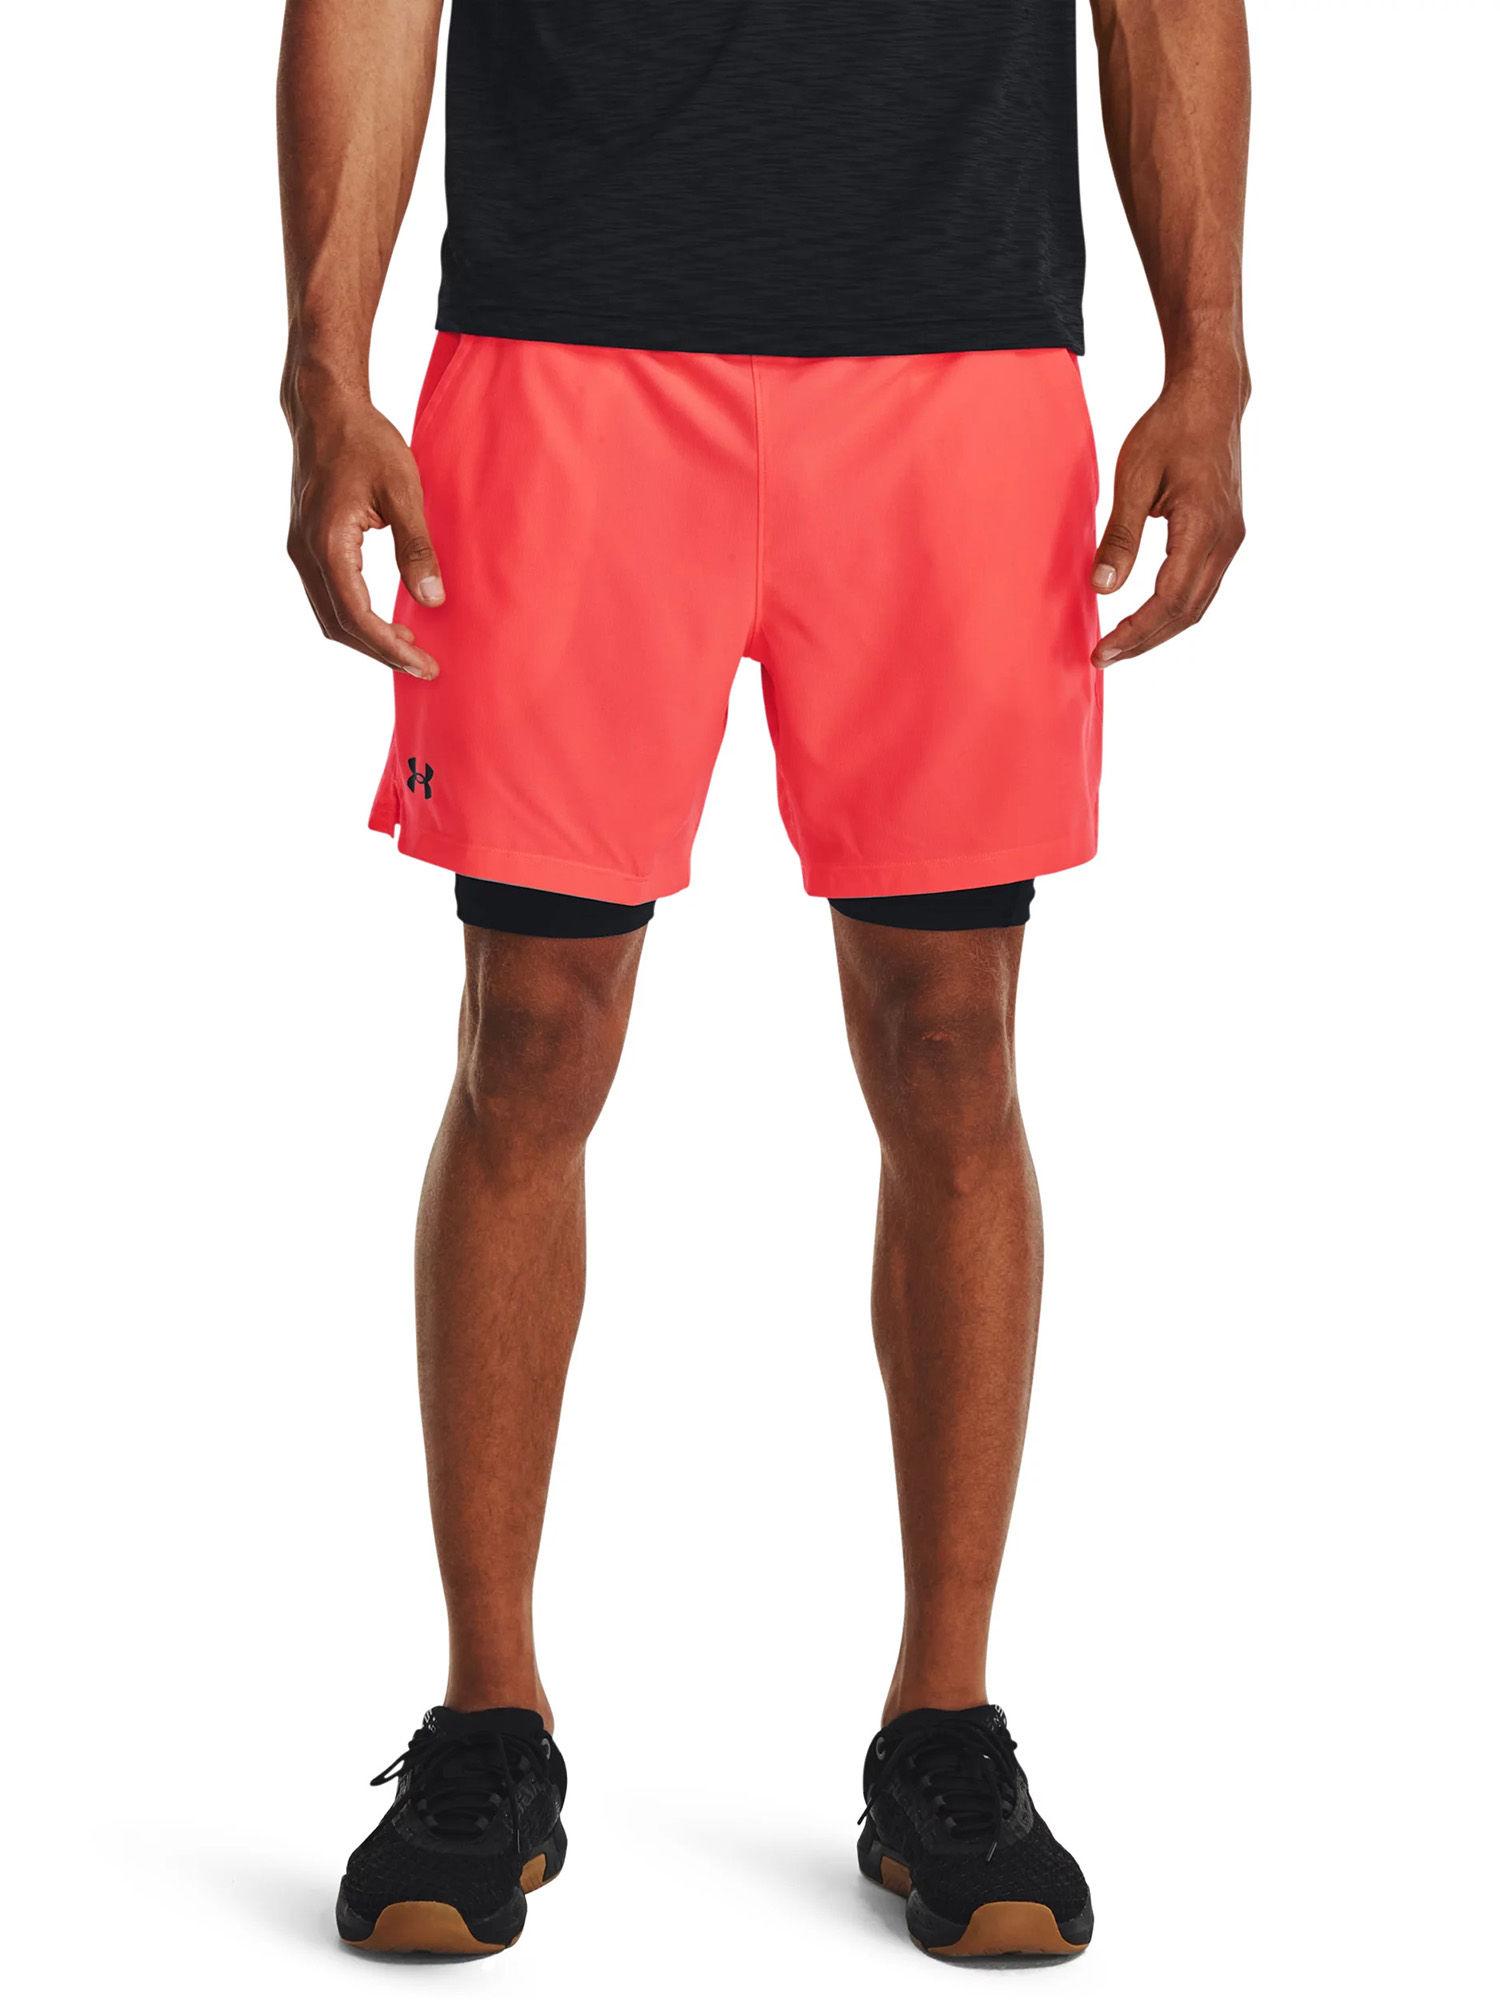 ua vanish woven 2 in 1 red shorts